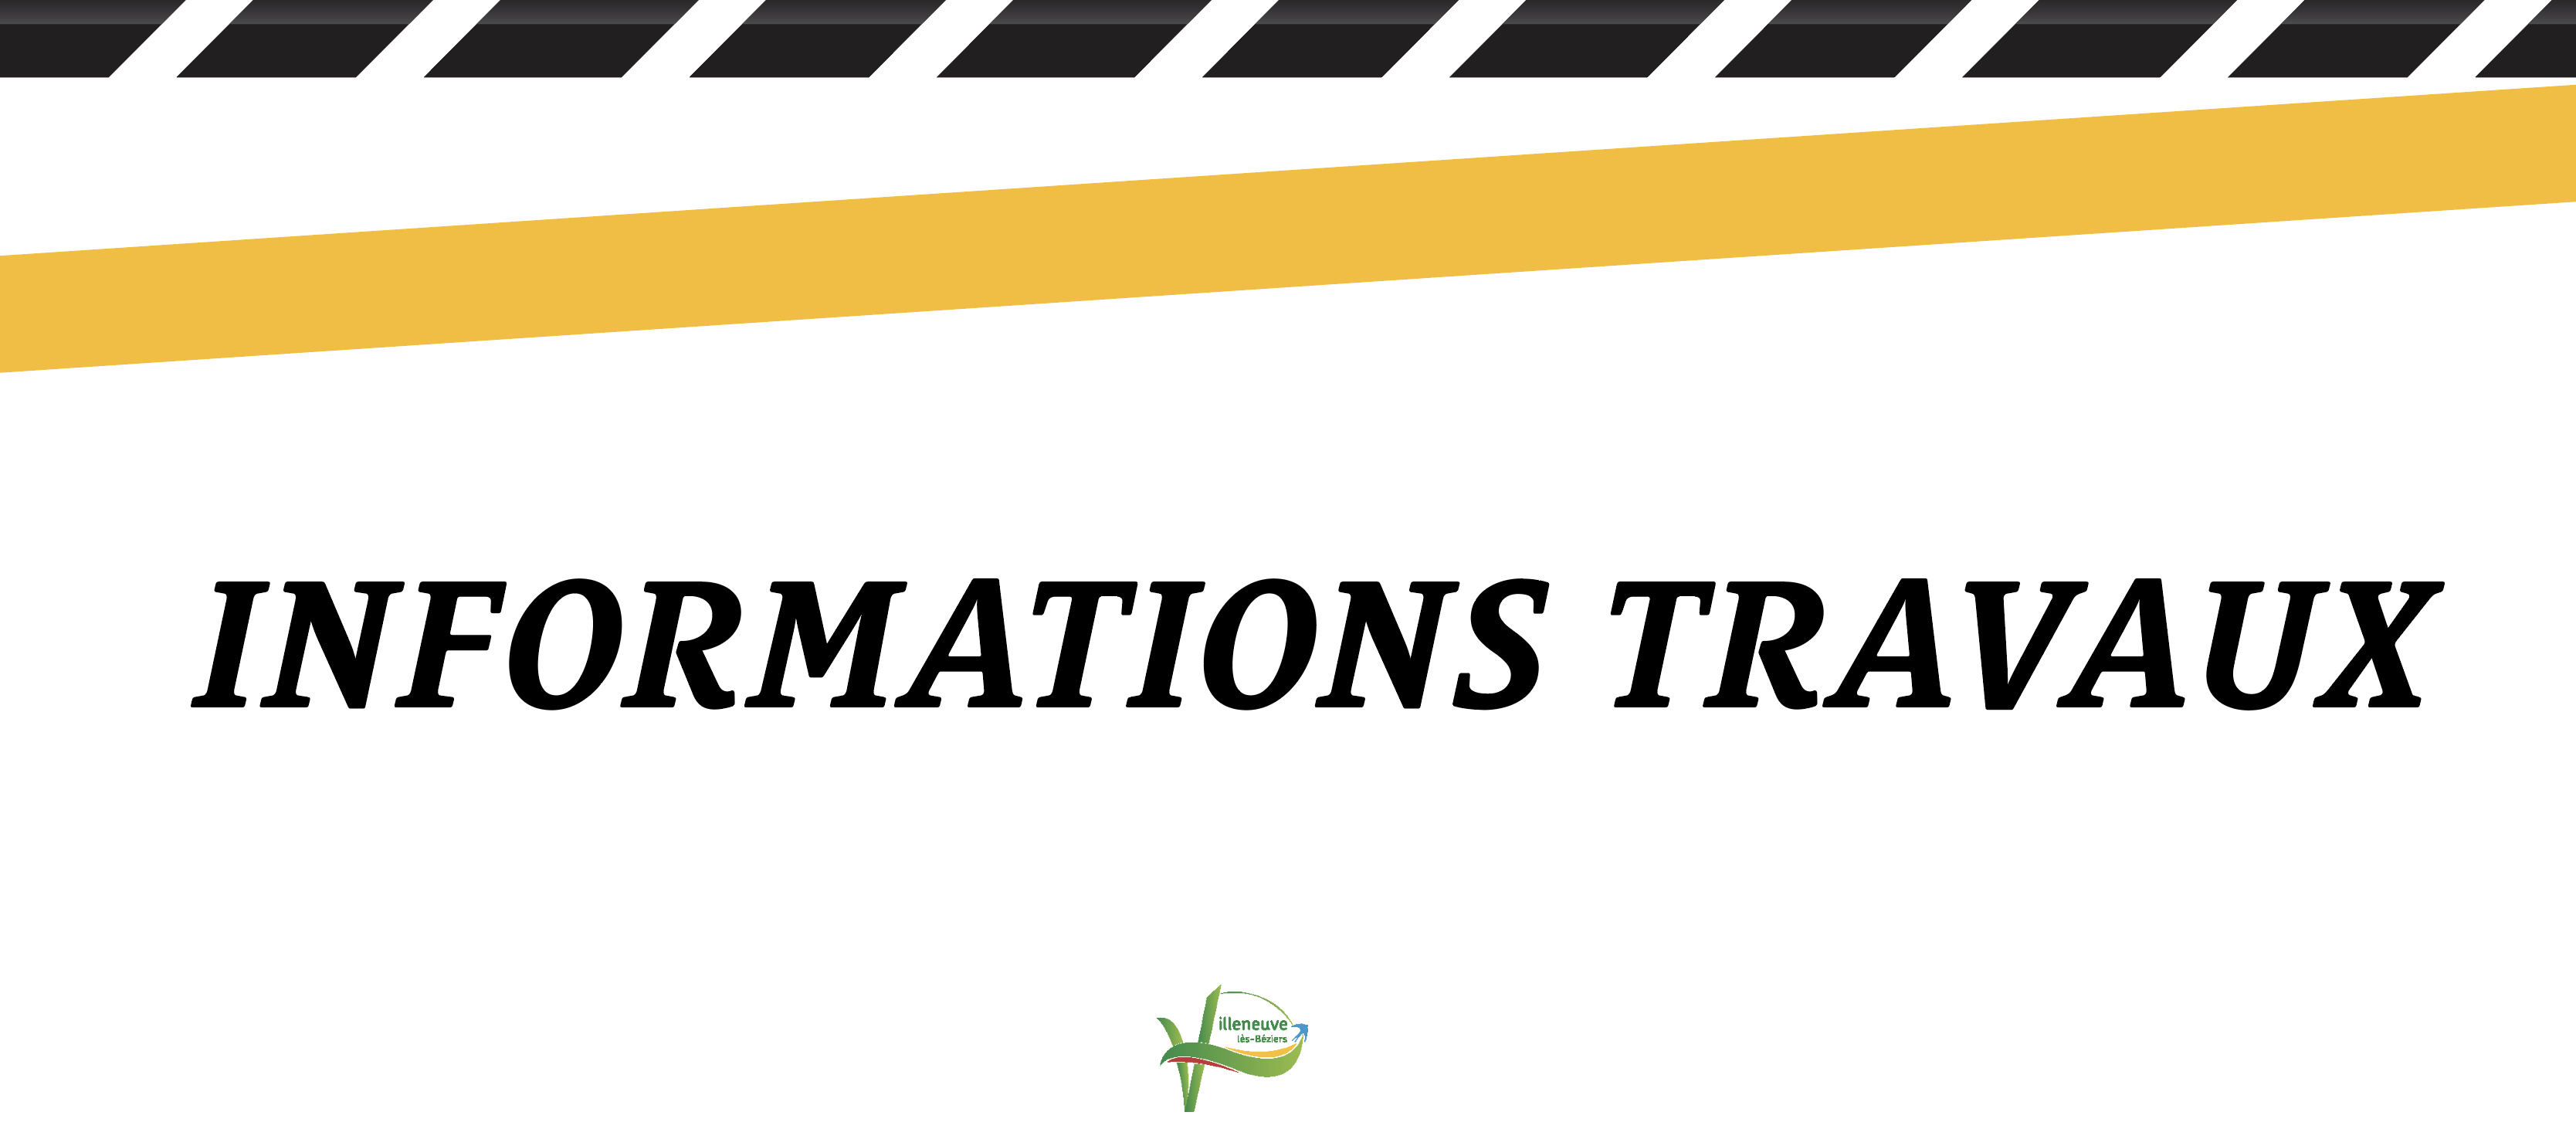 You are currently viewing INFORMATIONS TRAVAUX